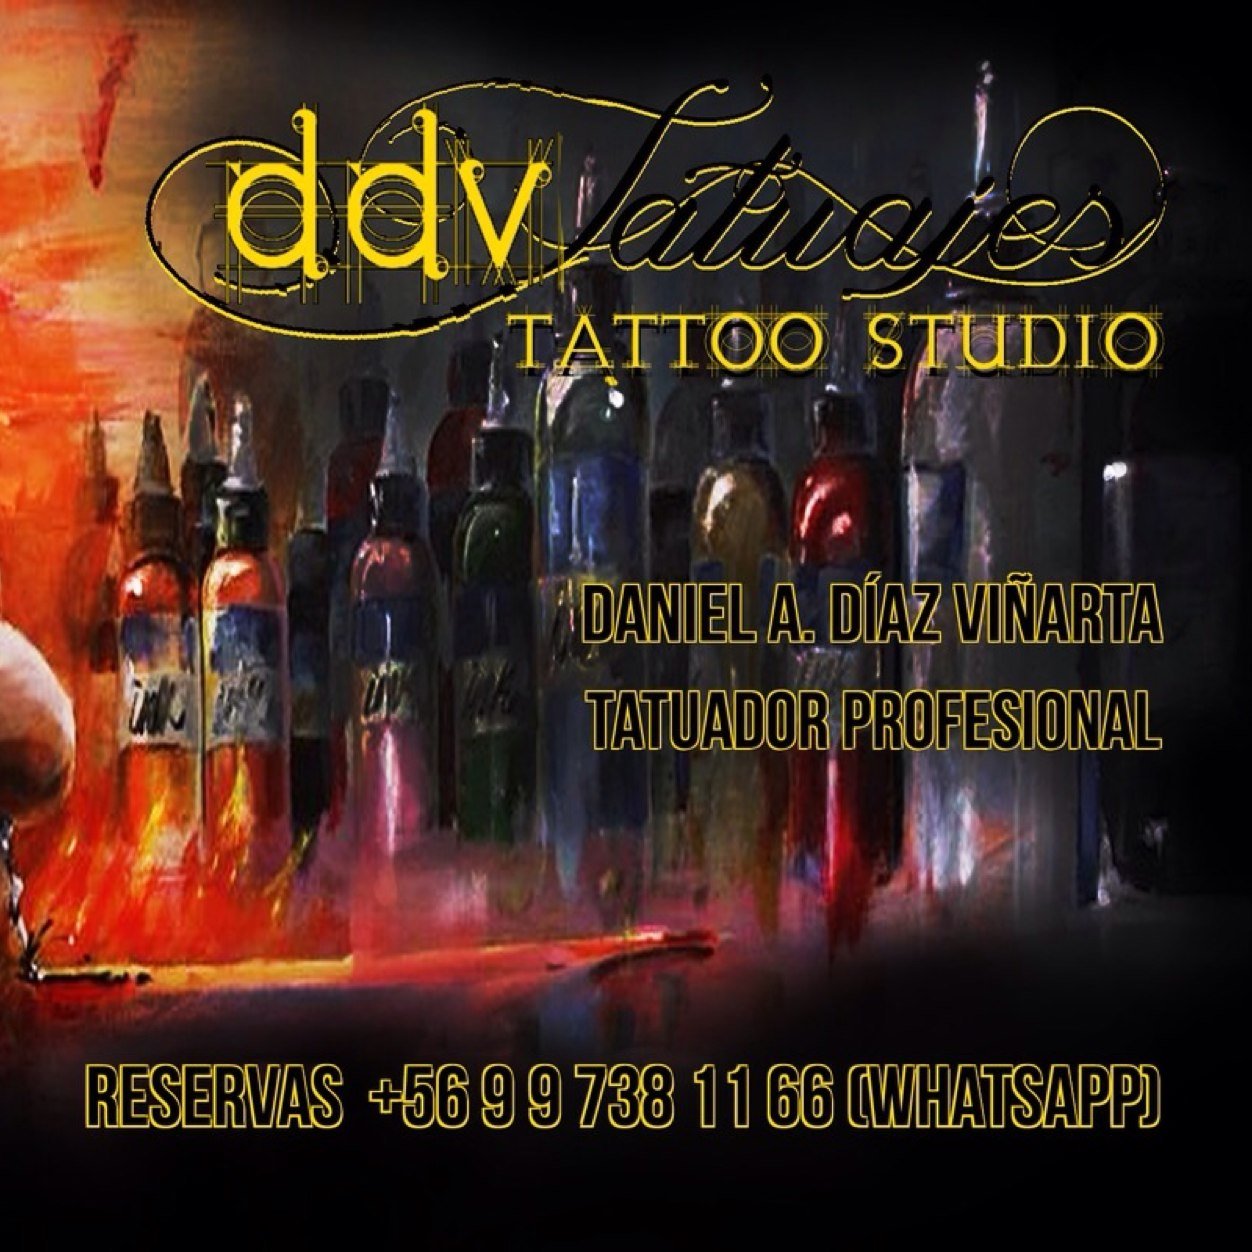 We are the only tattoo studio in all Chilean patagonia. Tatuajes corporales, https://t.co/zzWGCMxDzJ +56997381166 , Coyhaique Chile